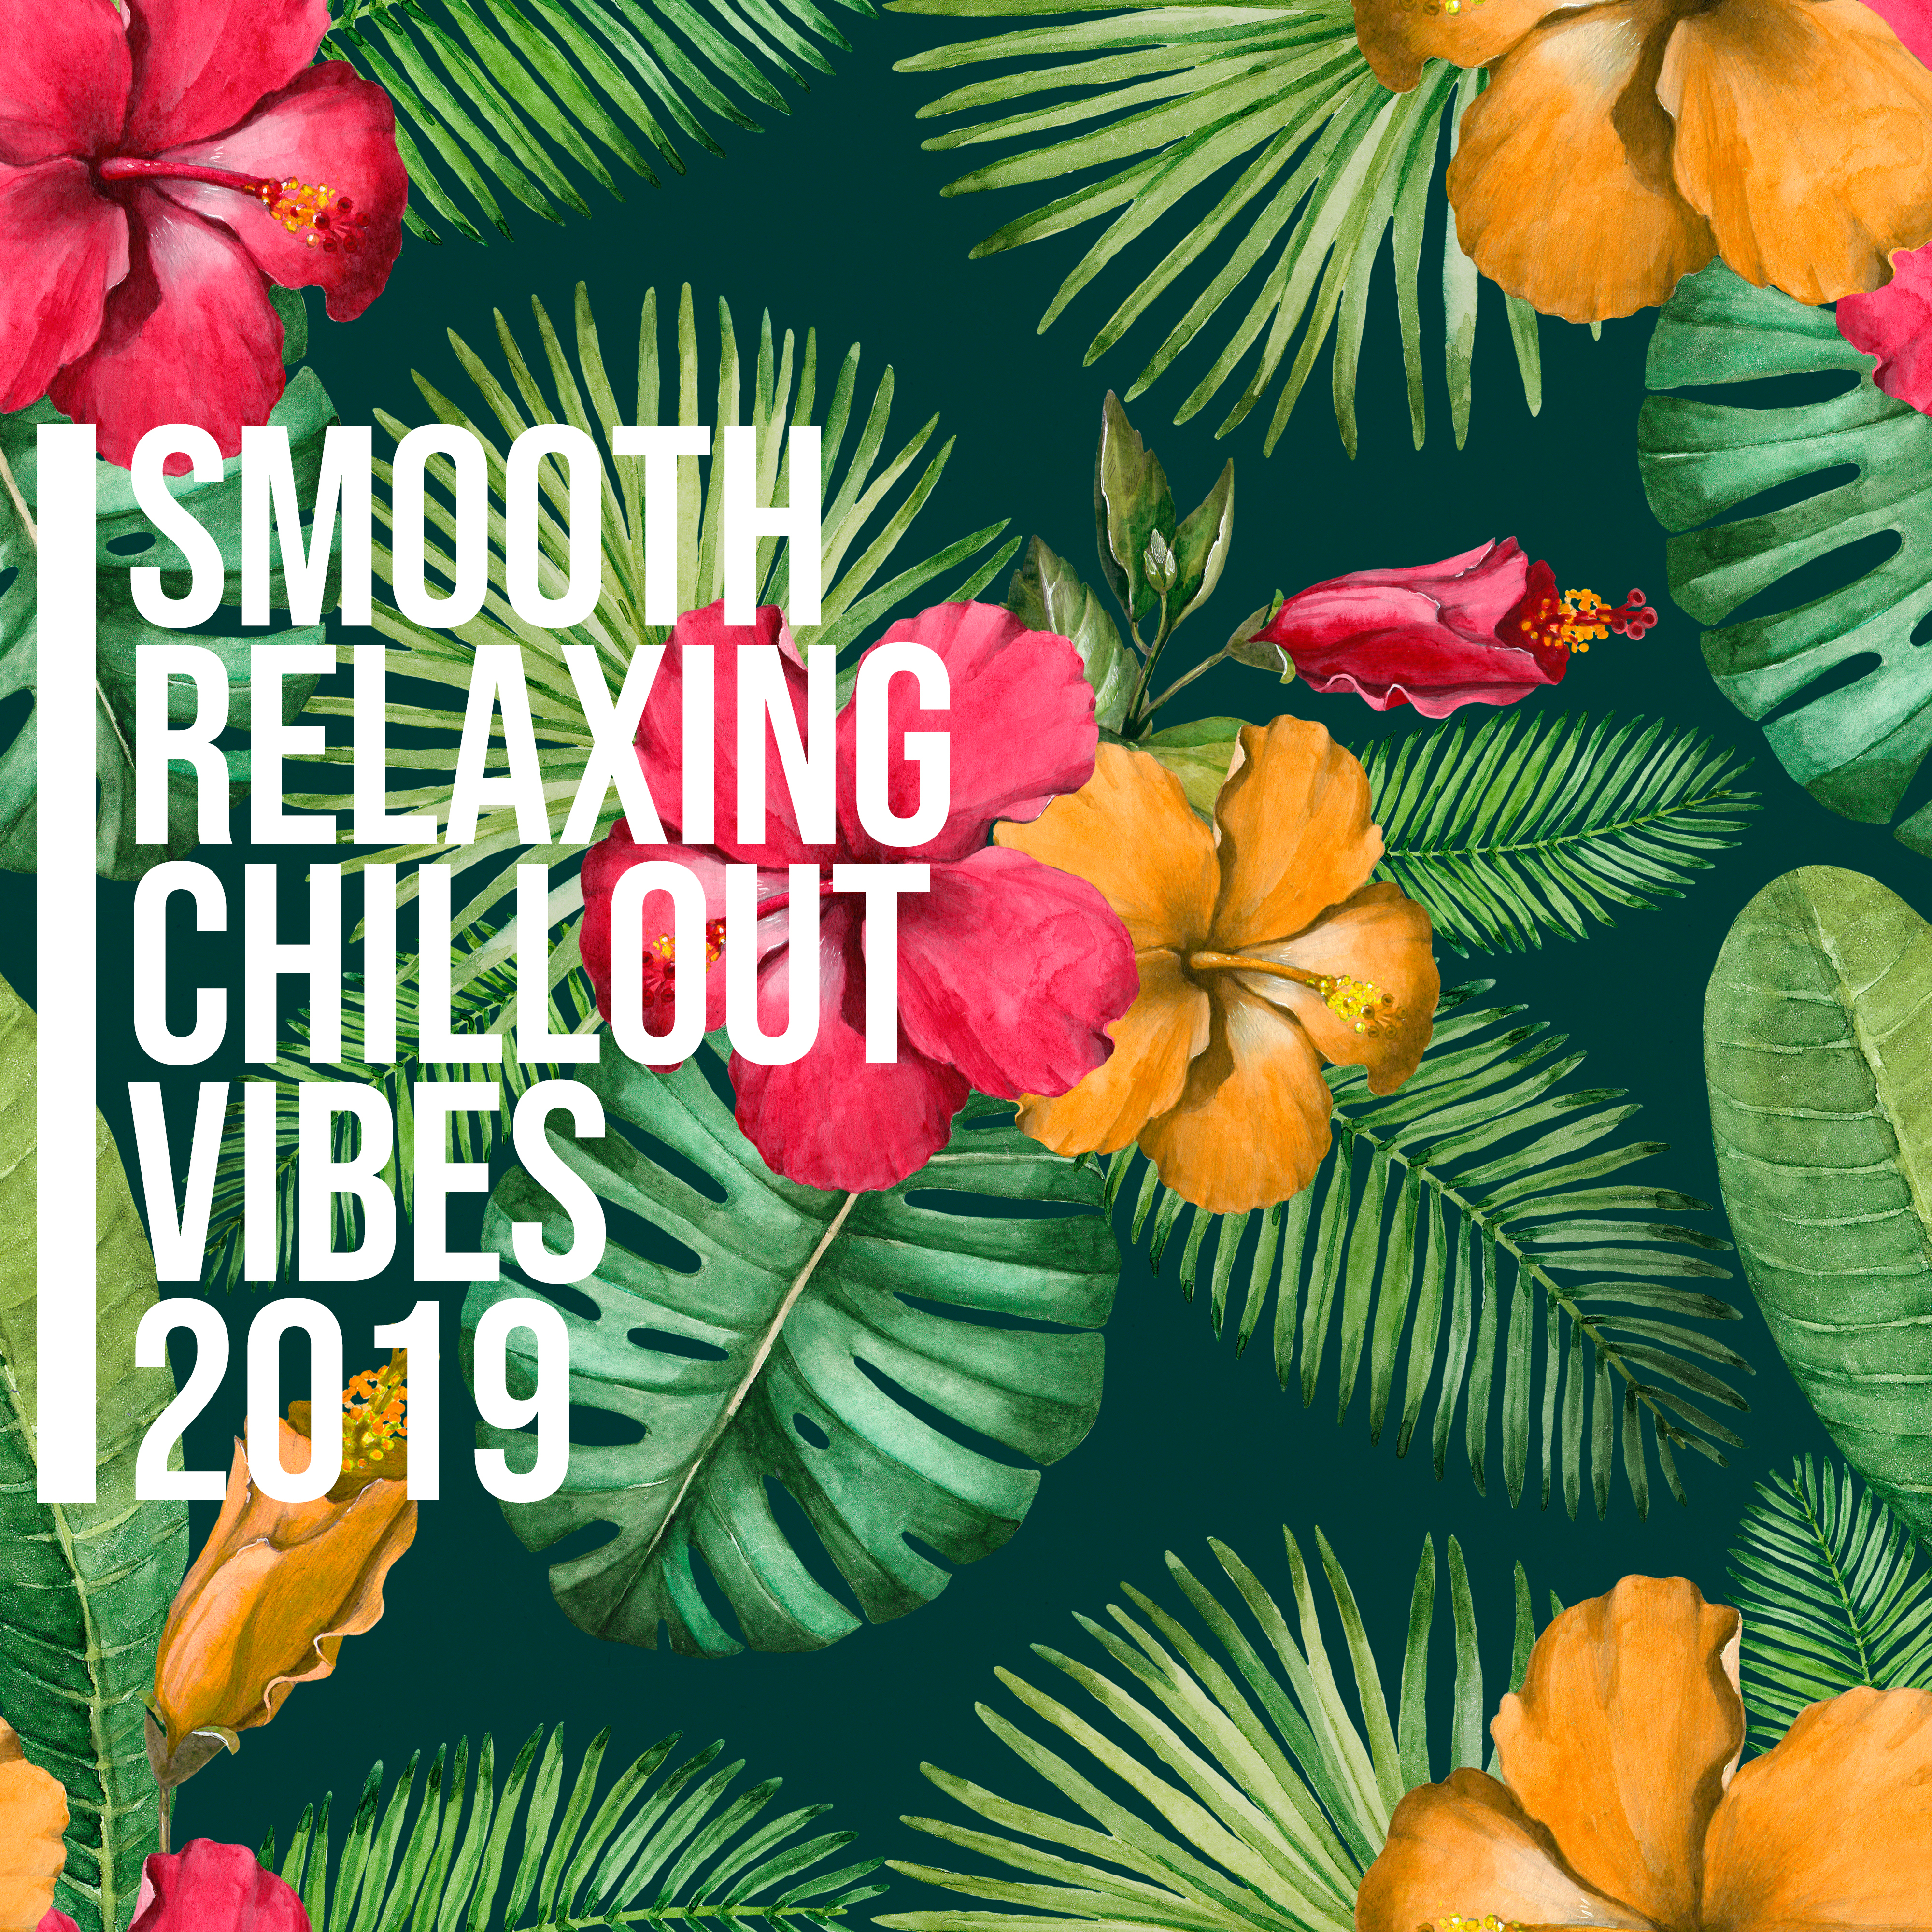 Smooth Relaxing Chillout Vibes 2019 – Calming Melodies for Pure Relaxation Under the Palms